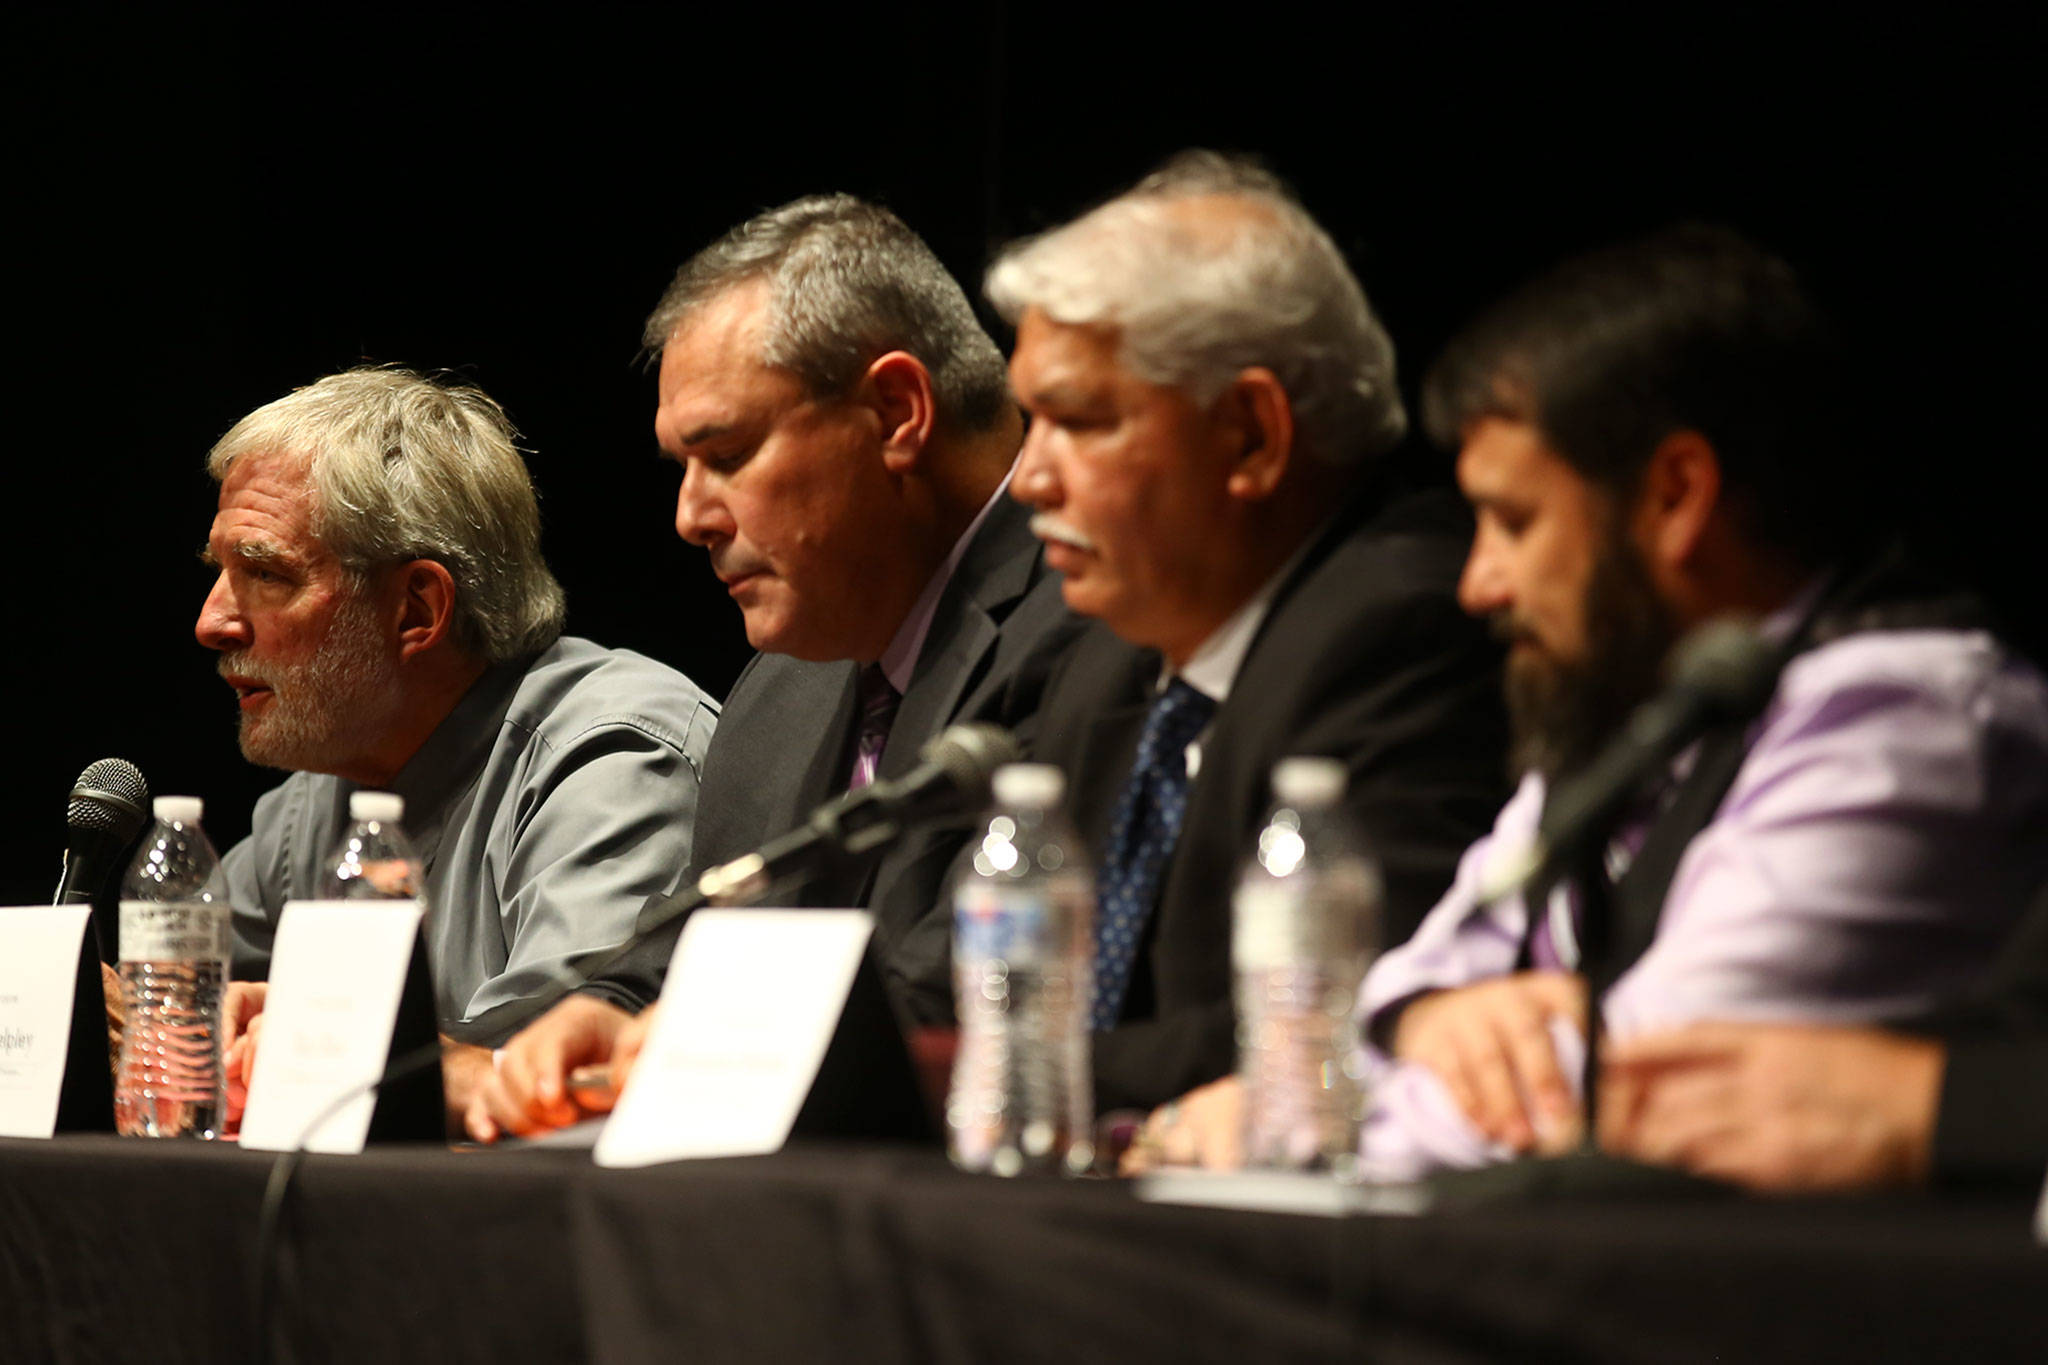 Mukilteo City Council candidates (left to right) Richard Emery, Scott Whelpley, Riaz Khan and Christopher Maddux make their case for election during a pre-election forum at Rosehill Community Center on Oct. 23. As of Saturday, Khan is ahead of Maddux and Emery is leading Whelpley for two of the seats open. (Kevin Clark / Herald file)